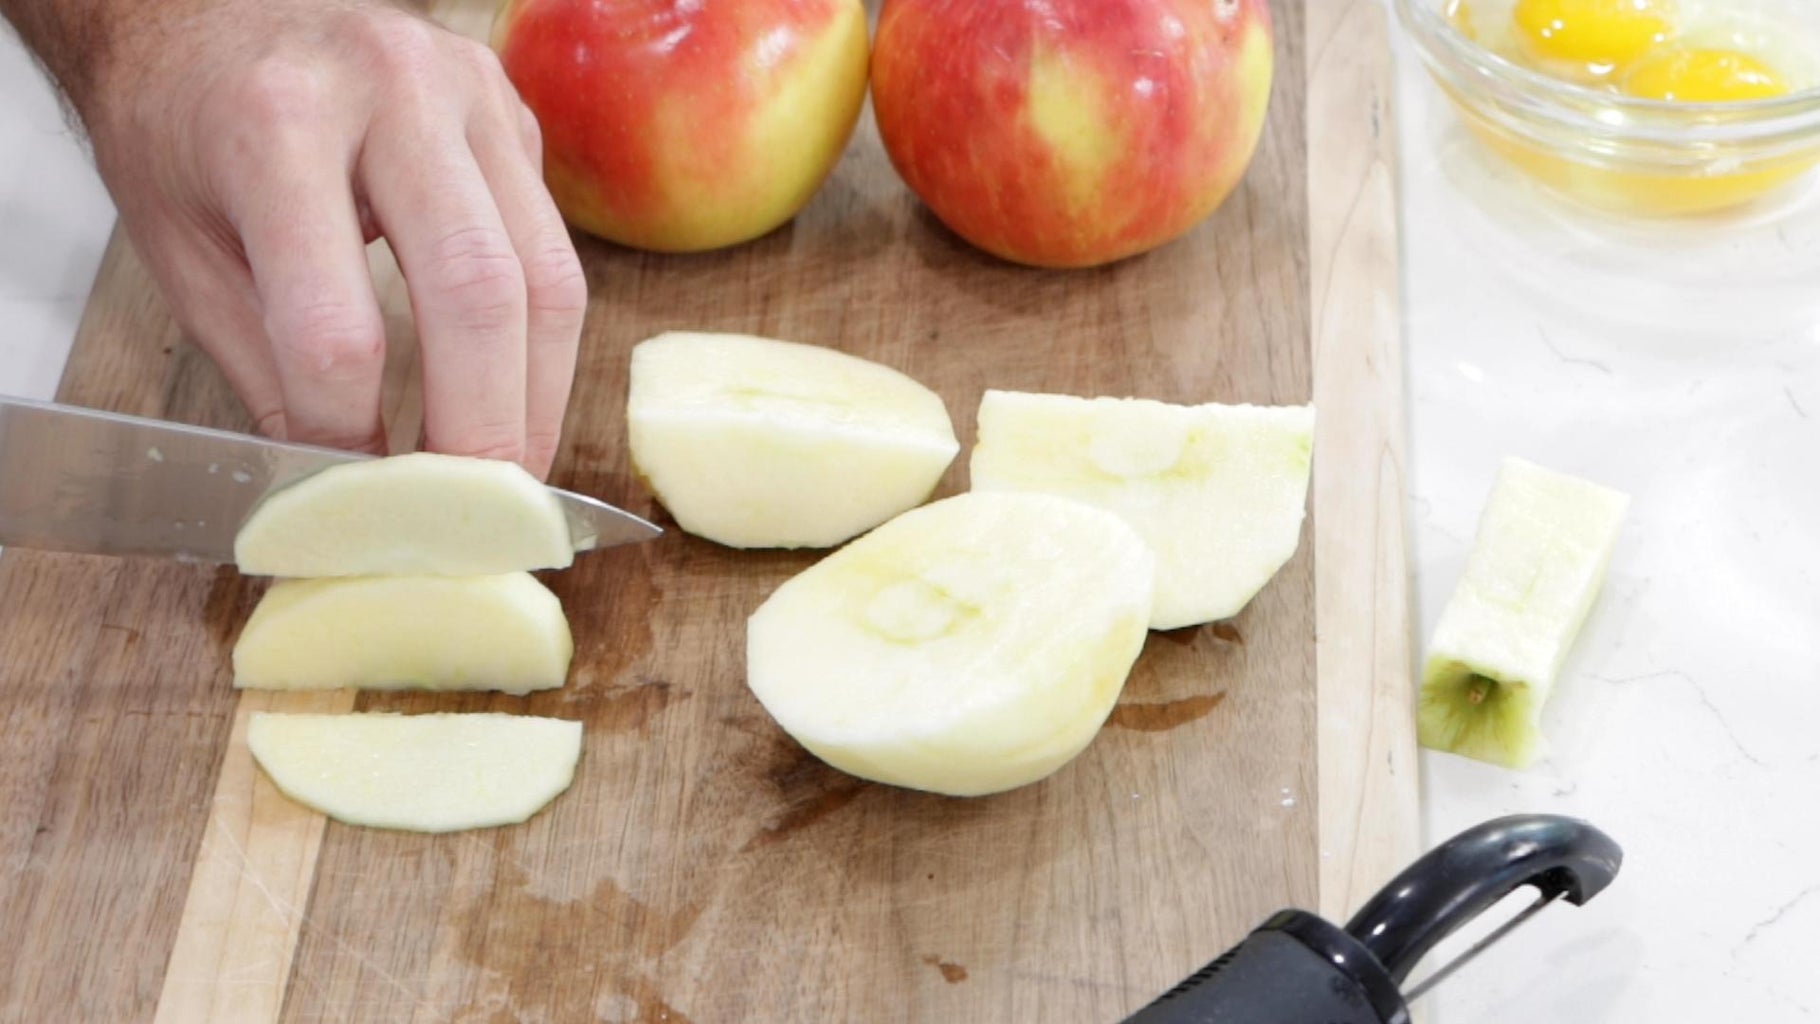 Rinse, Peel, and Slice the Apples